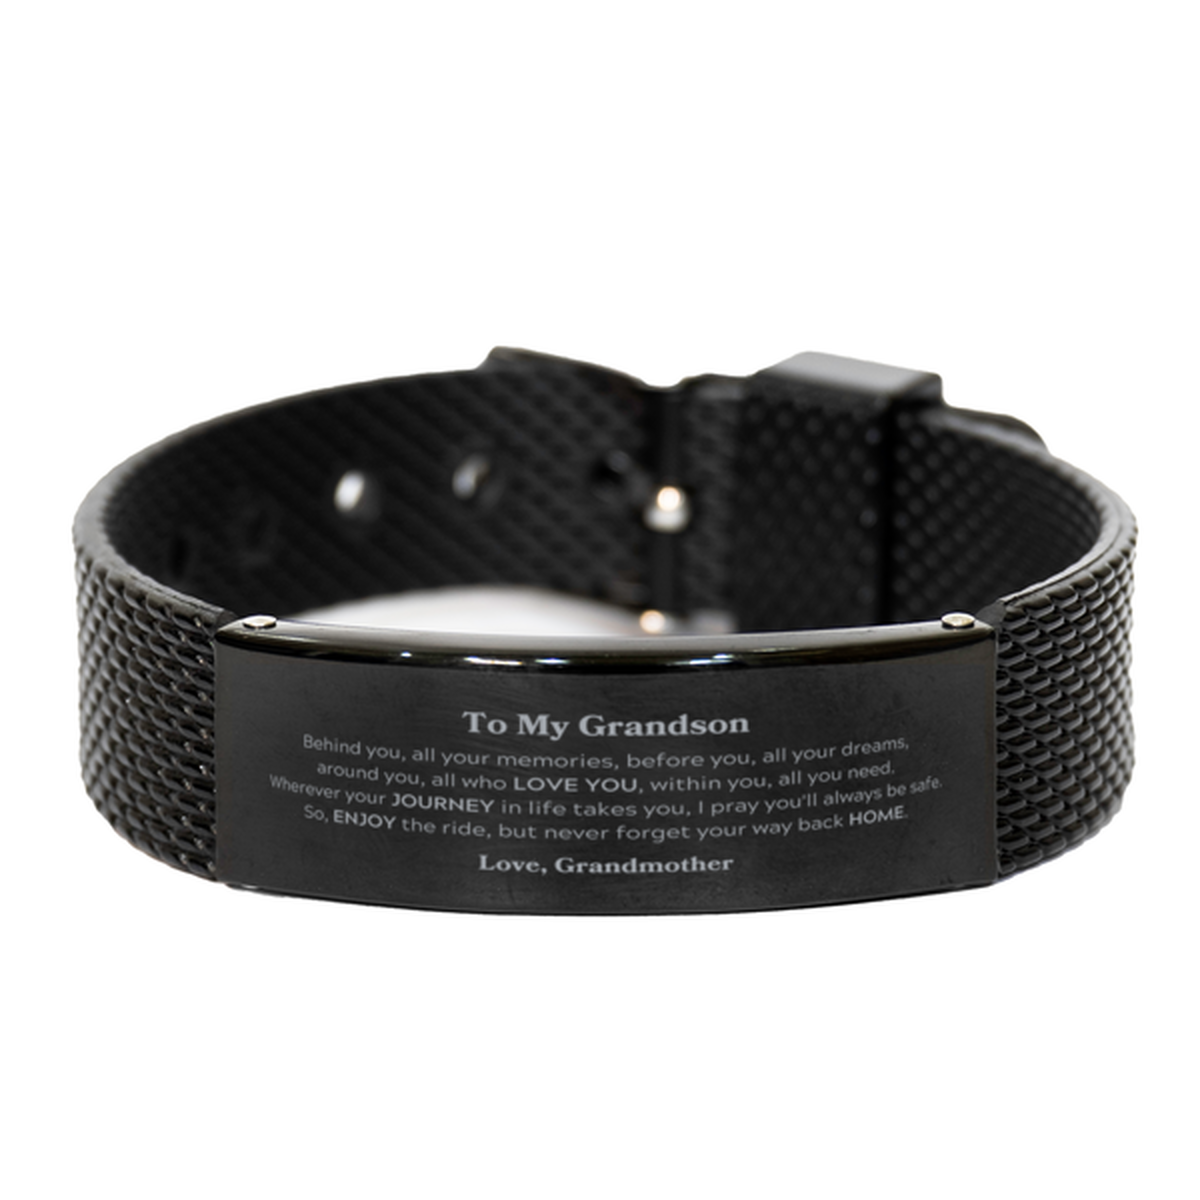 To My Grandson Graduation Gifts from Grandmother, Grandson Black Shark Mesh Bracelet Christmas Birthday Gifts for Grandson Behind you, all your memories, before you, all your dreams. Love, Grandmother